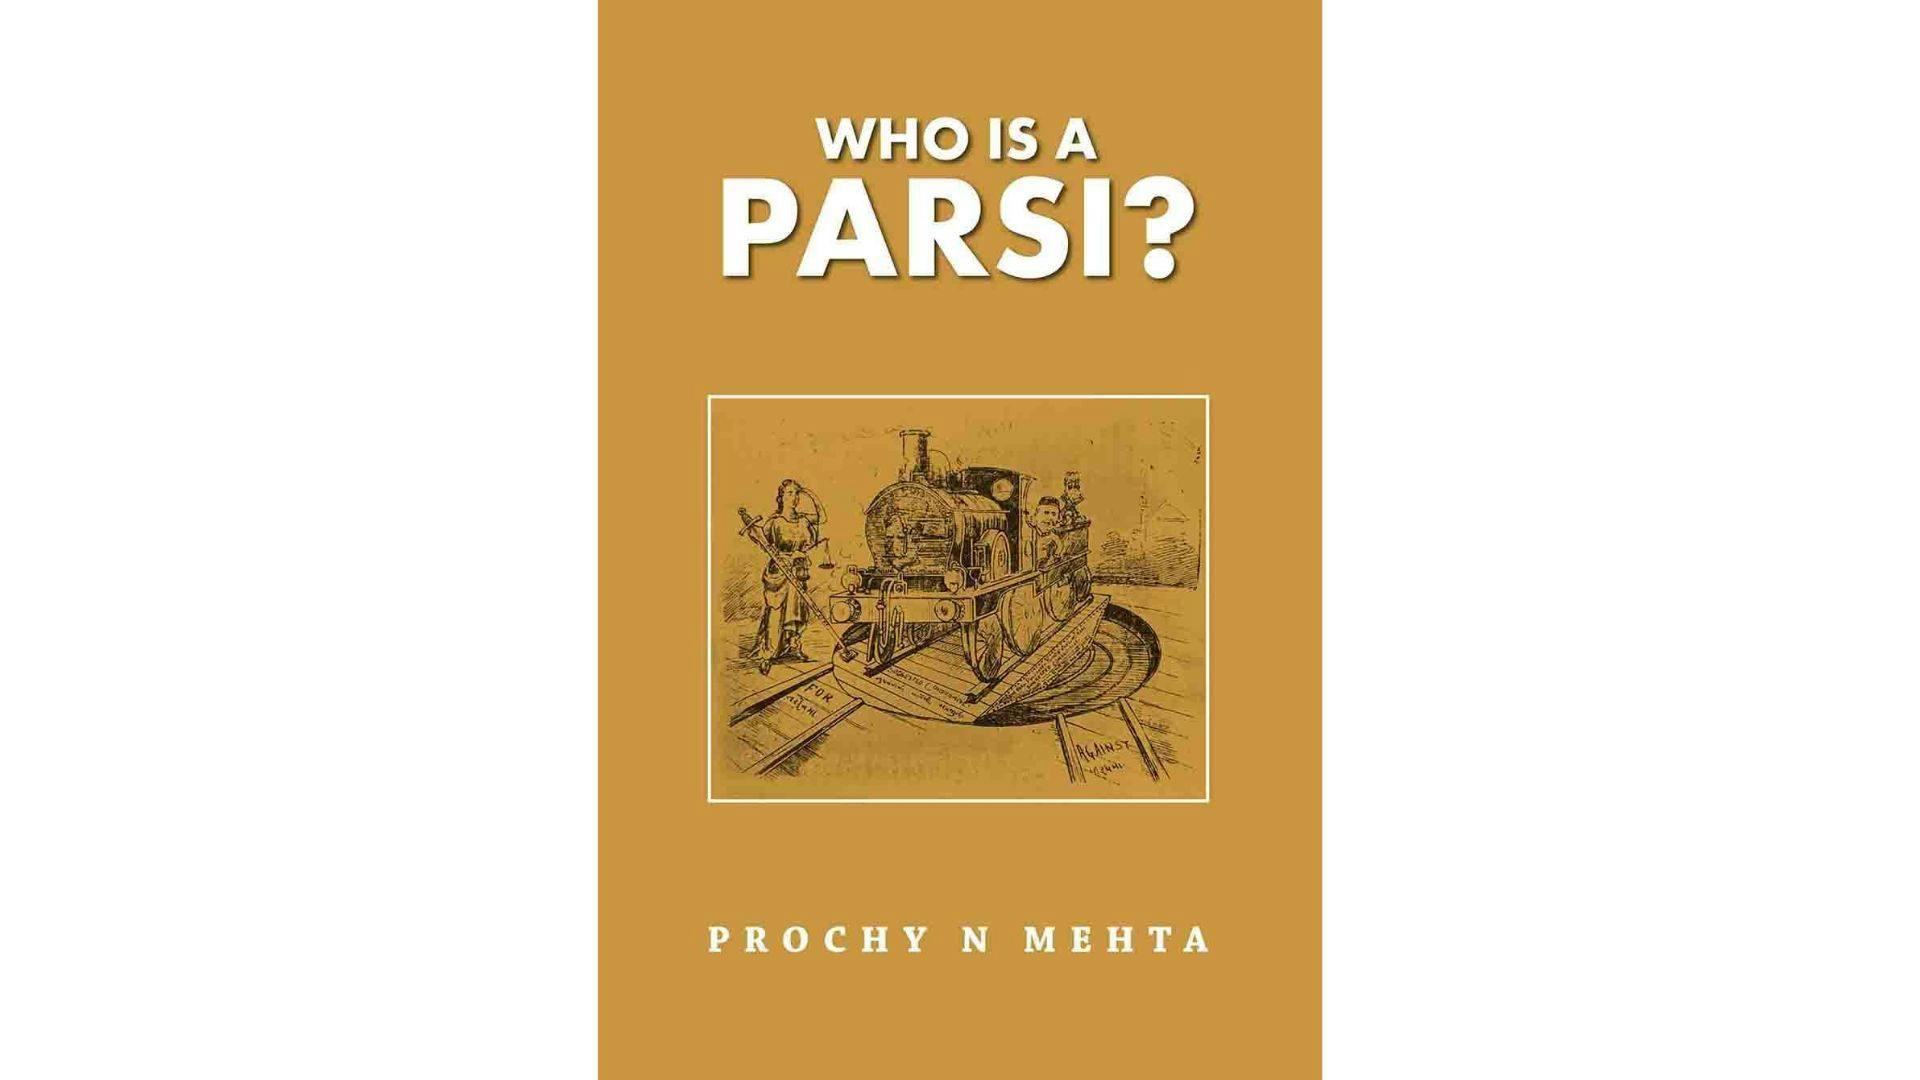 Who is a Parsi? by Prochy N Mehta